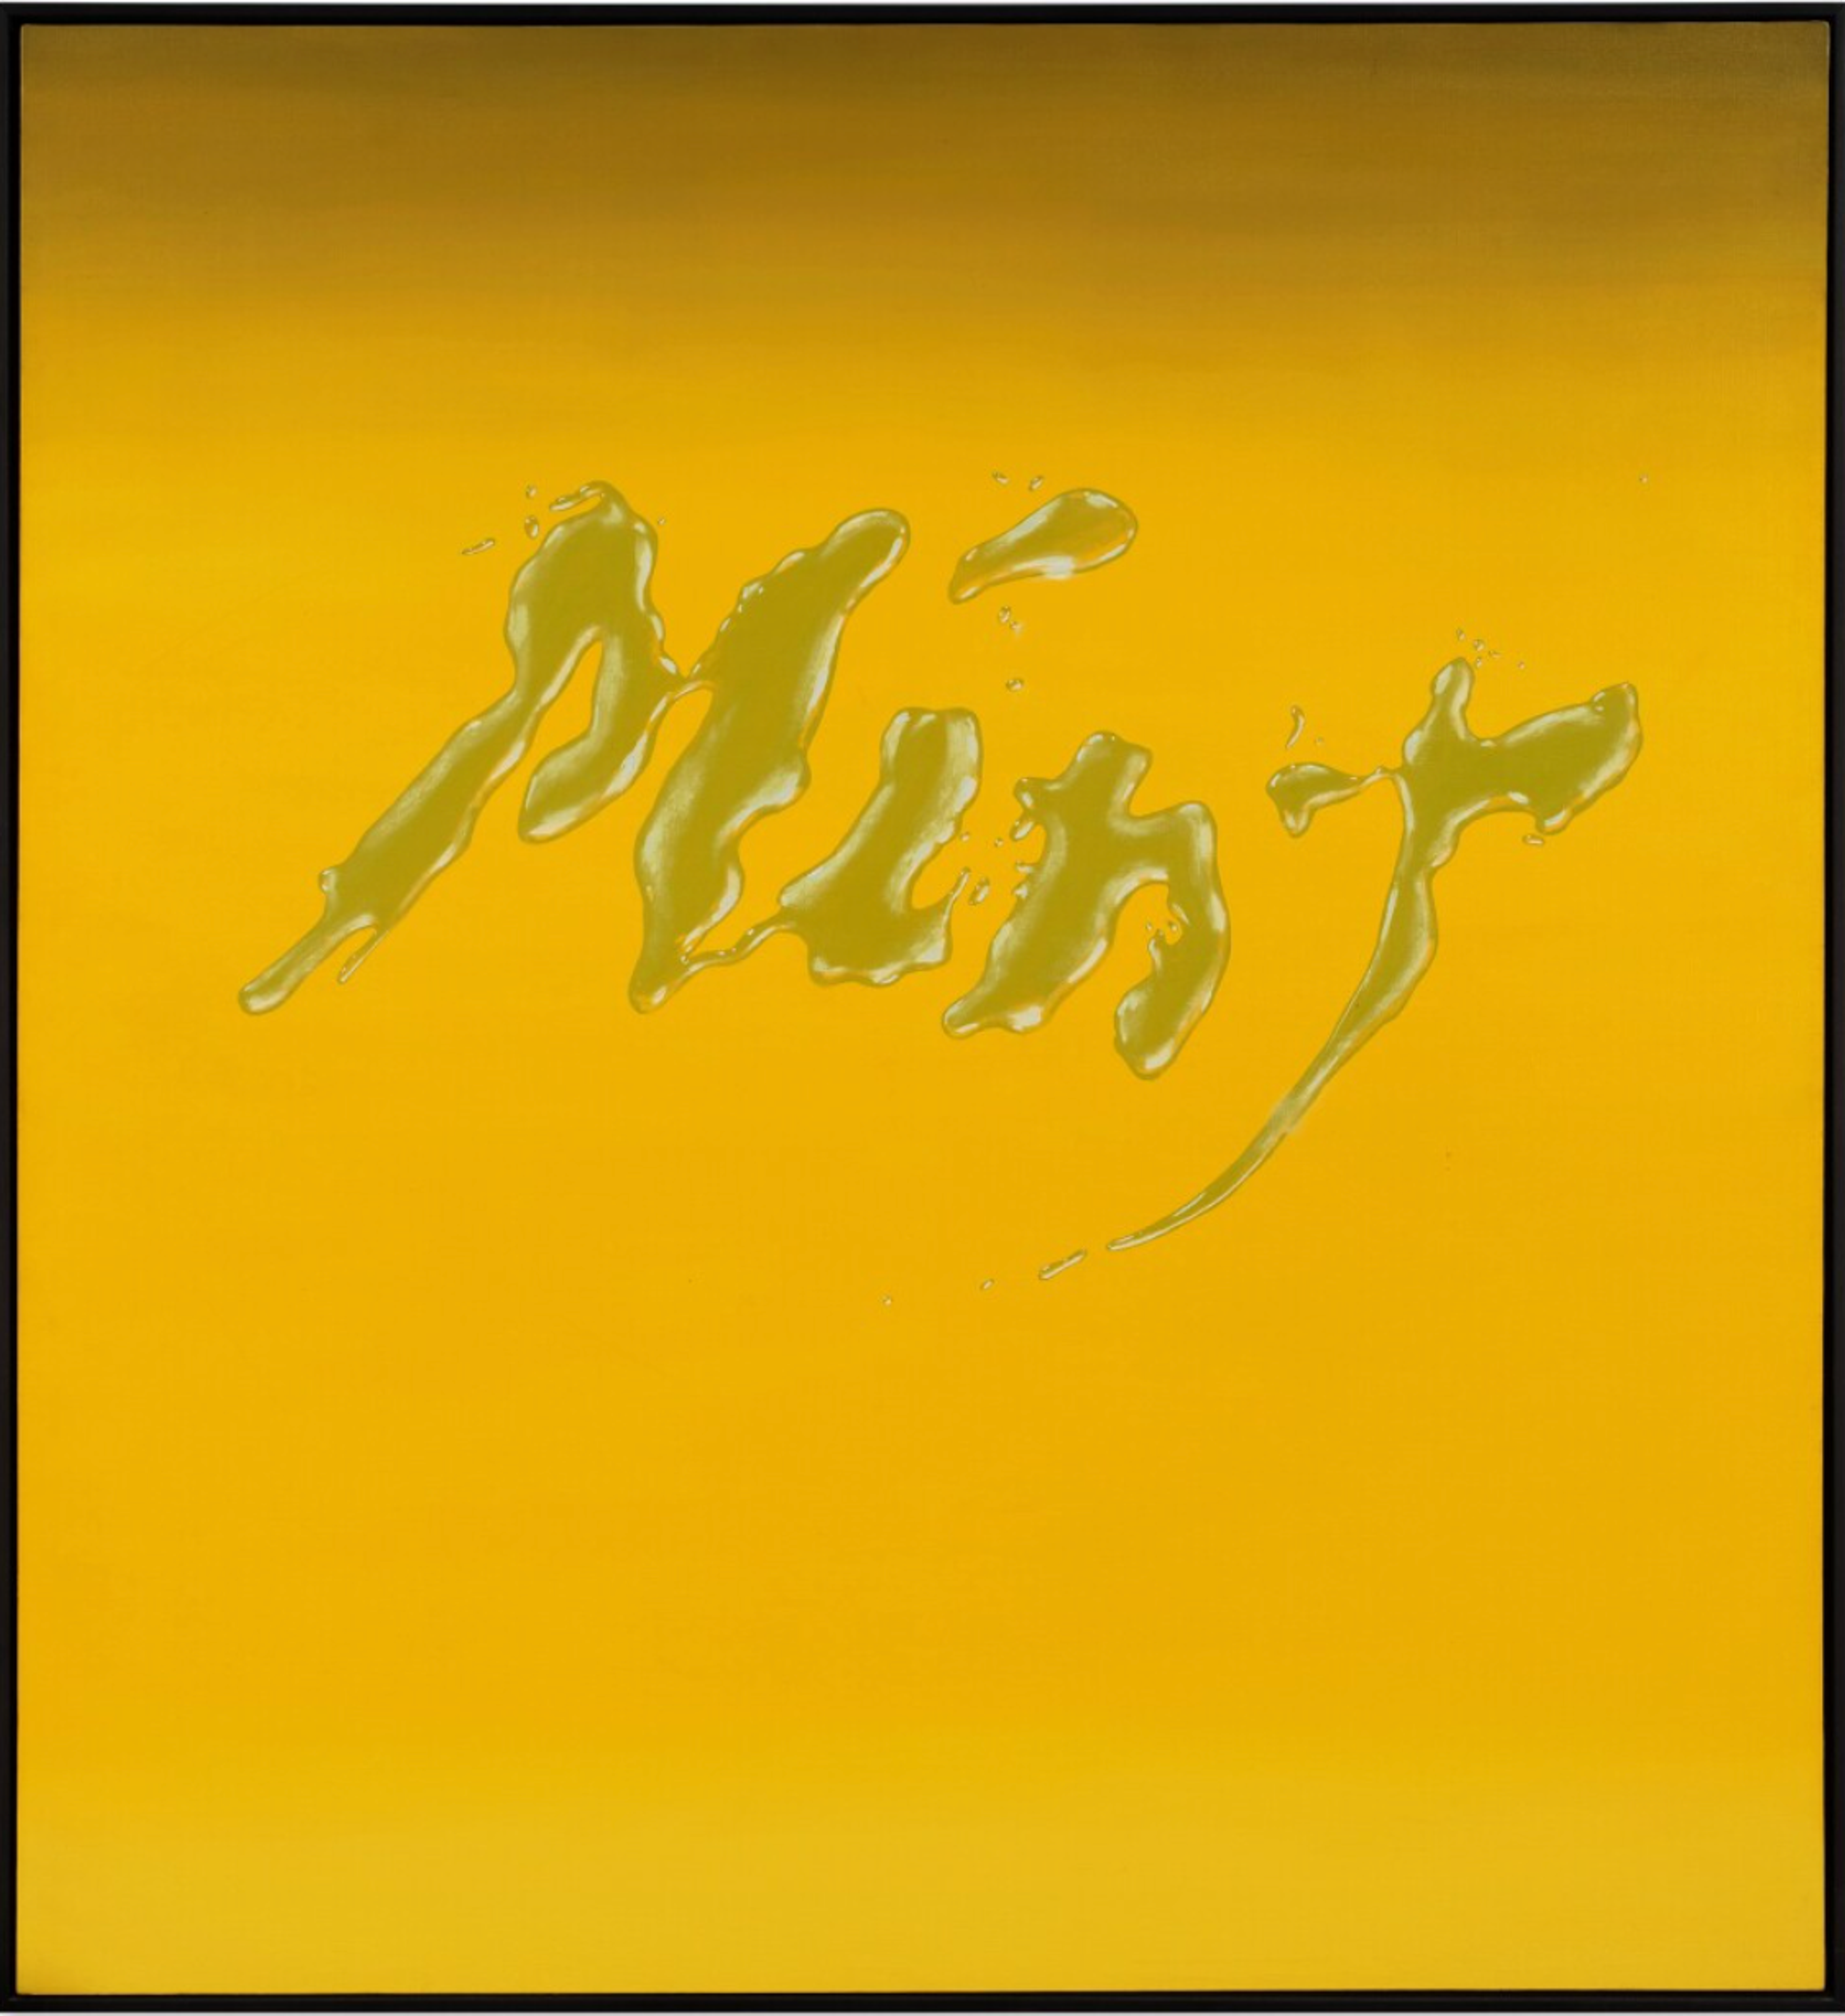 Painting by Ed Ruscha depicting the word 'mint' in a murky green colour against a mustard yellow background. The lettering is fluid and uneven, resembling liquid.